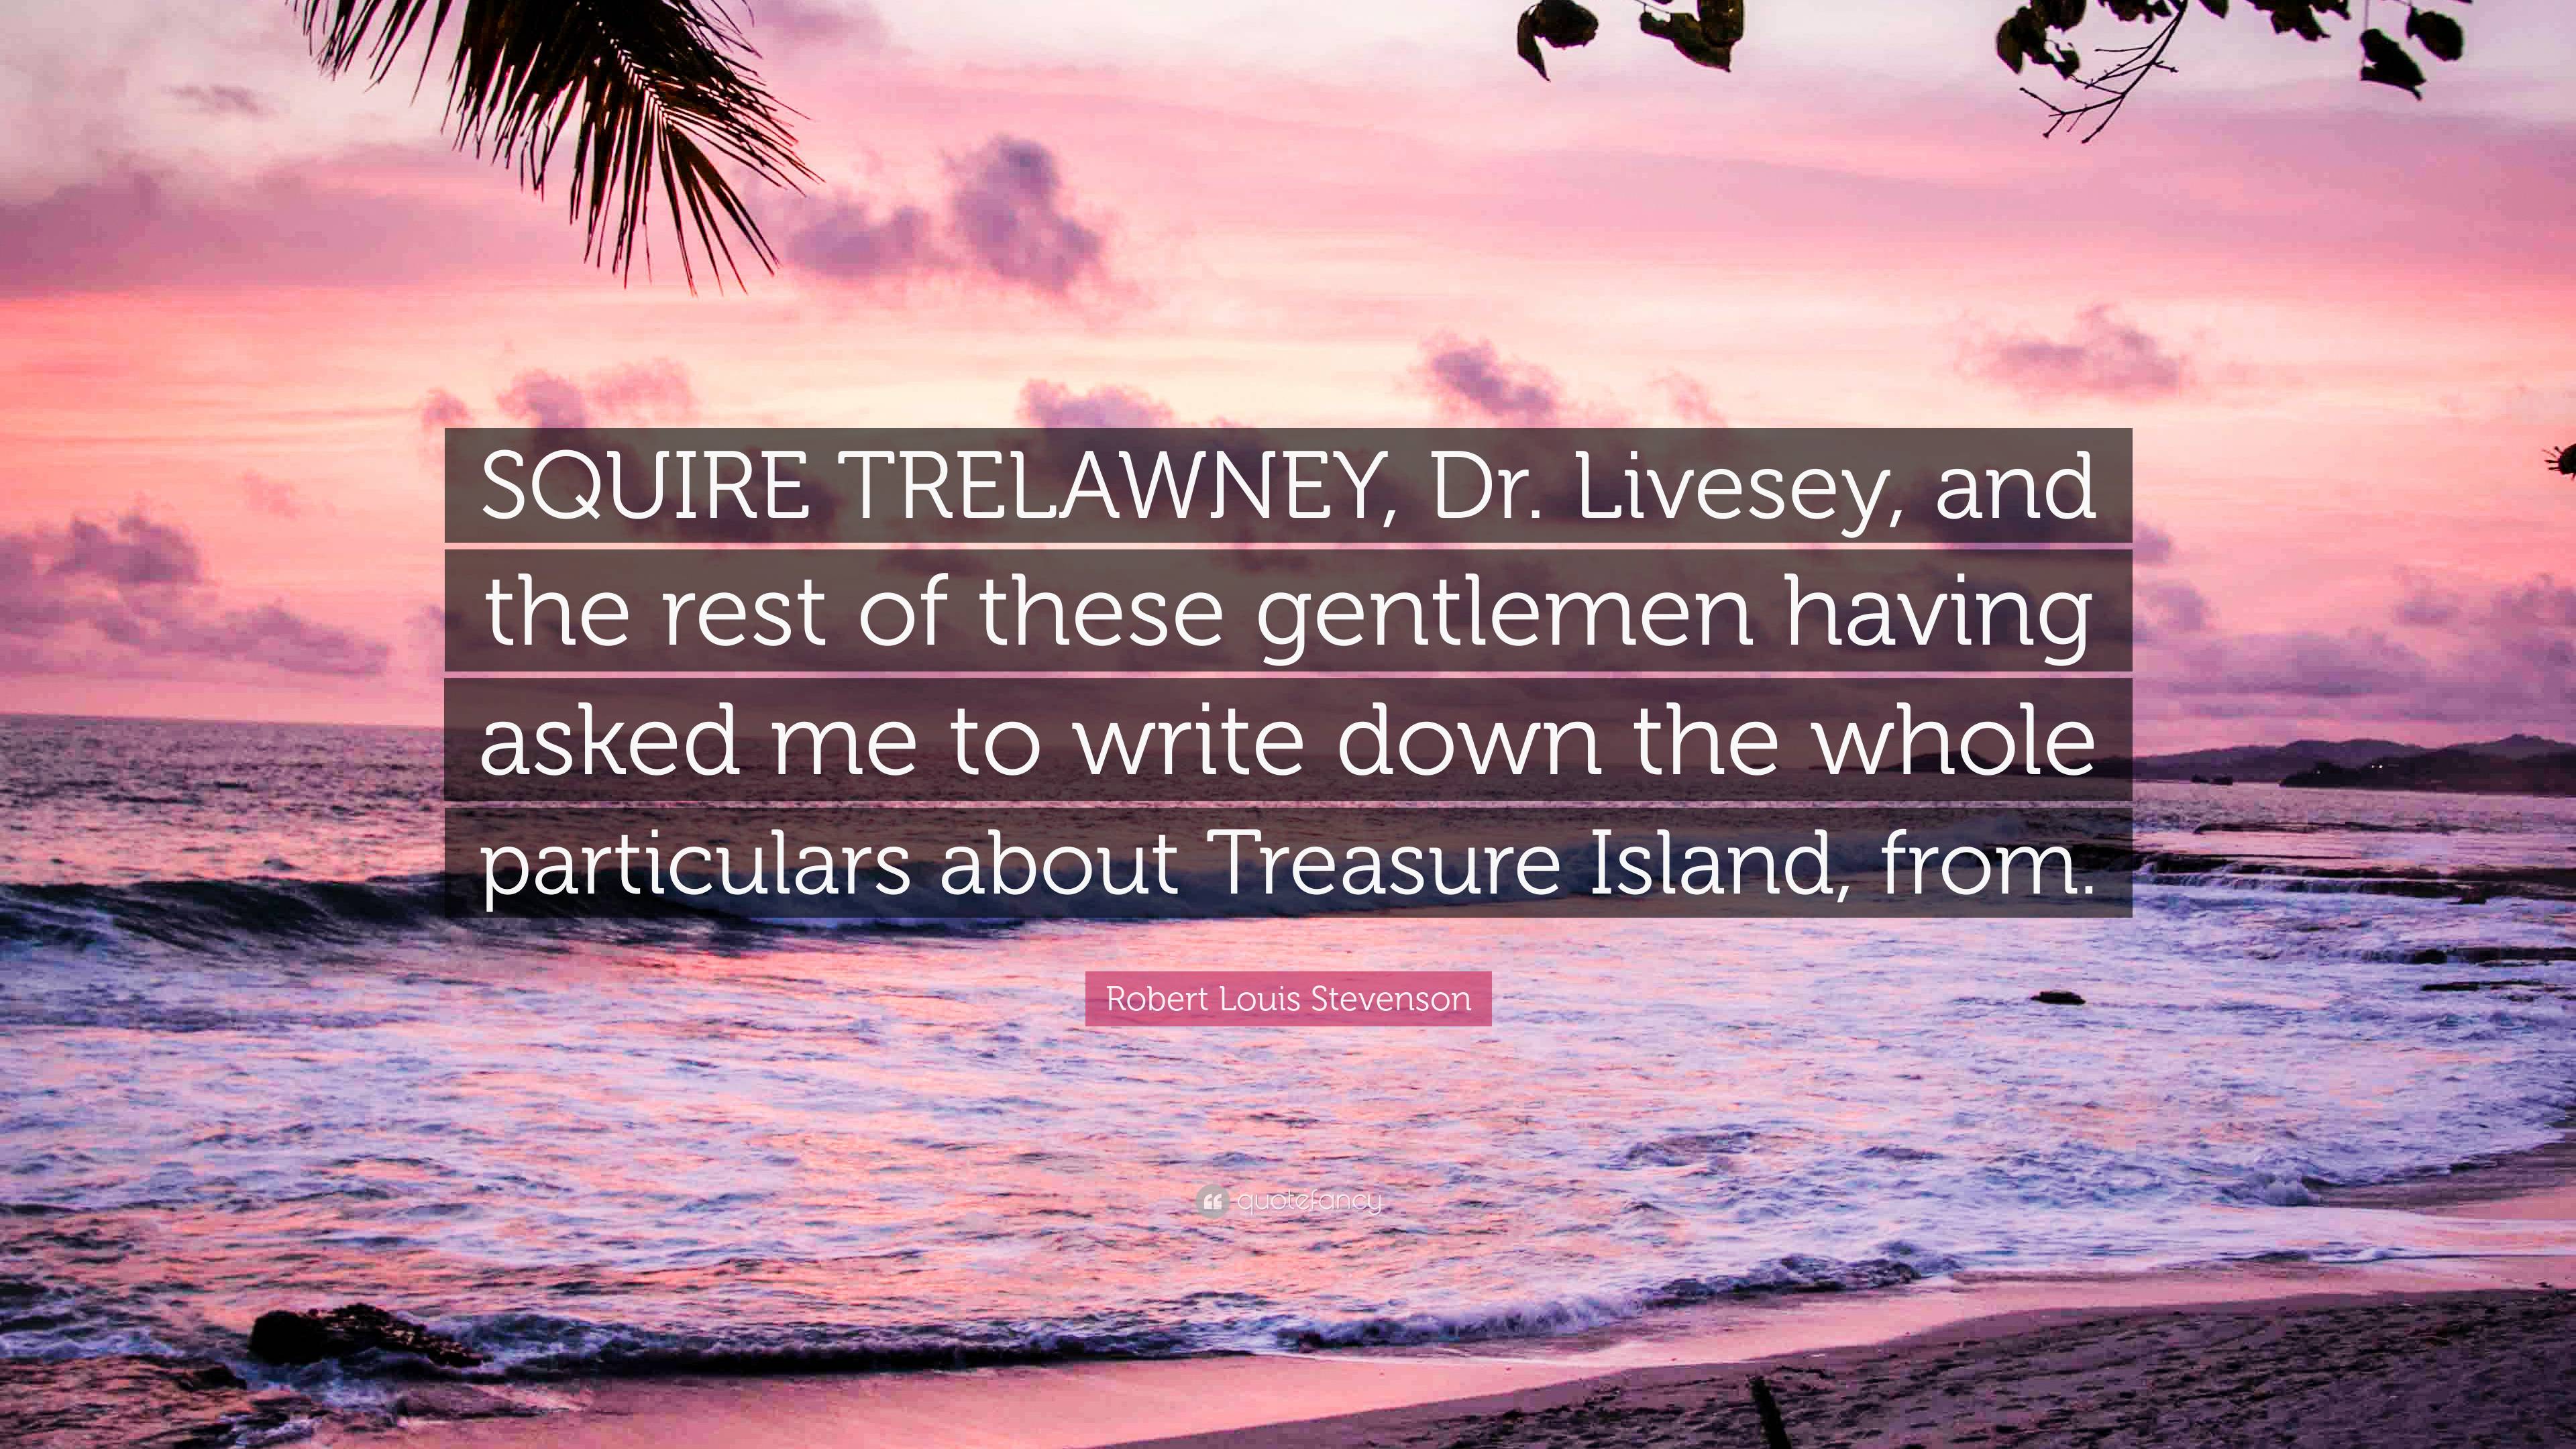 Hello, Livesey From Treasure Island, Dr. Livesey